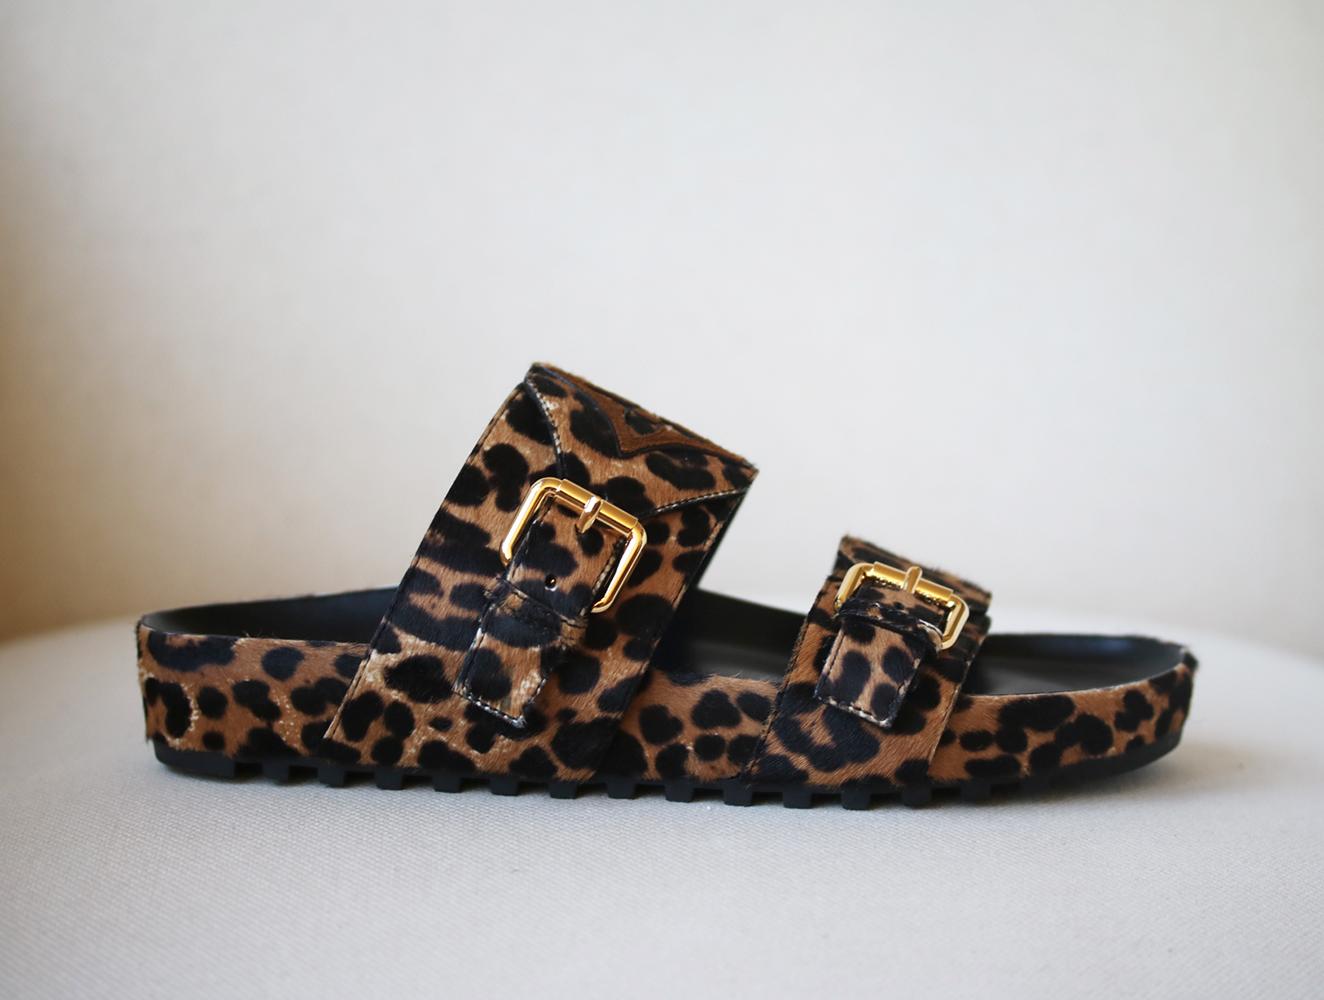 The Bom Dia Flat Mules come in pony-style calfskin with a bold leopard print as part of the LV Jungle capsule of accessories and leather goods. They are complemented by Monogram Flower patches in suede calf leather and engraved, gold-tone buckles.